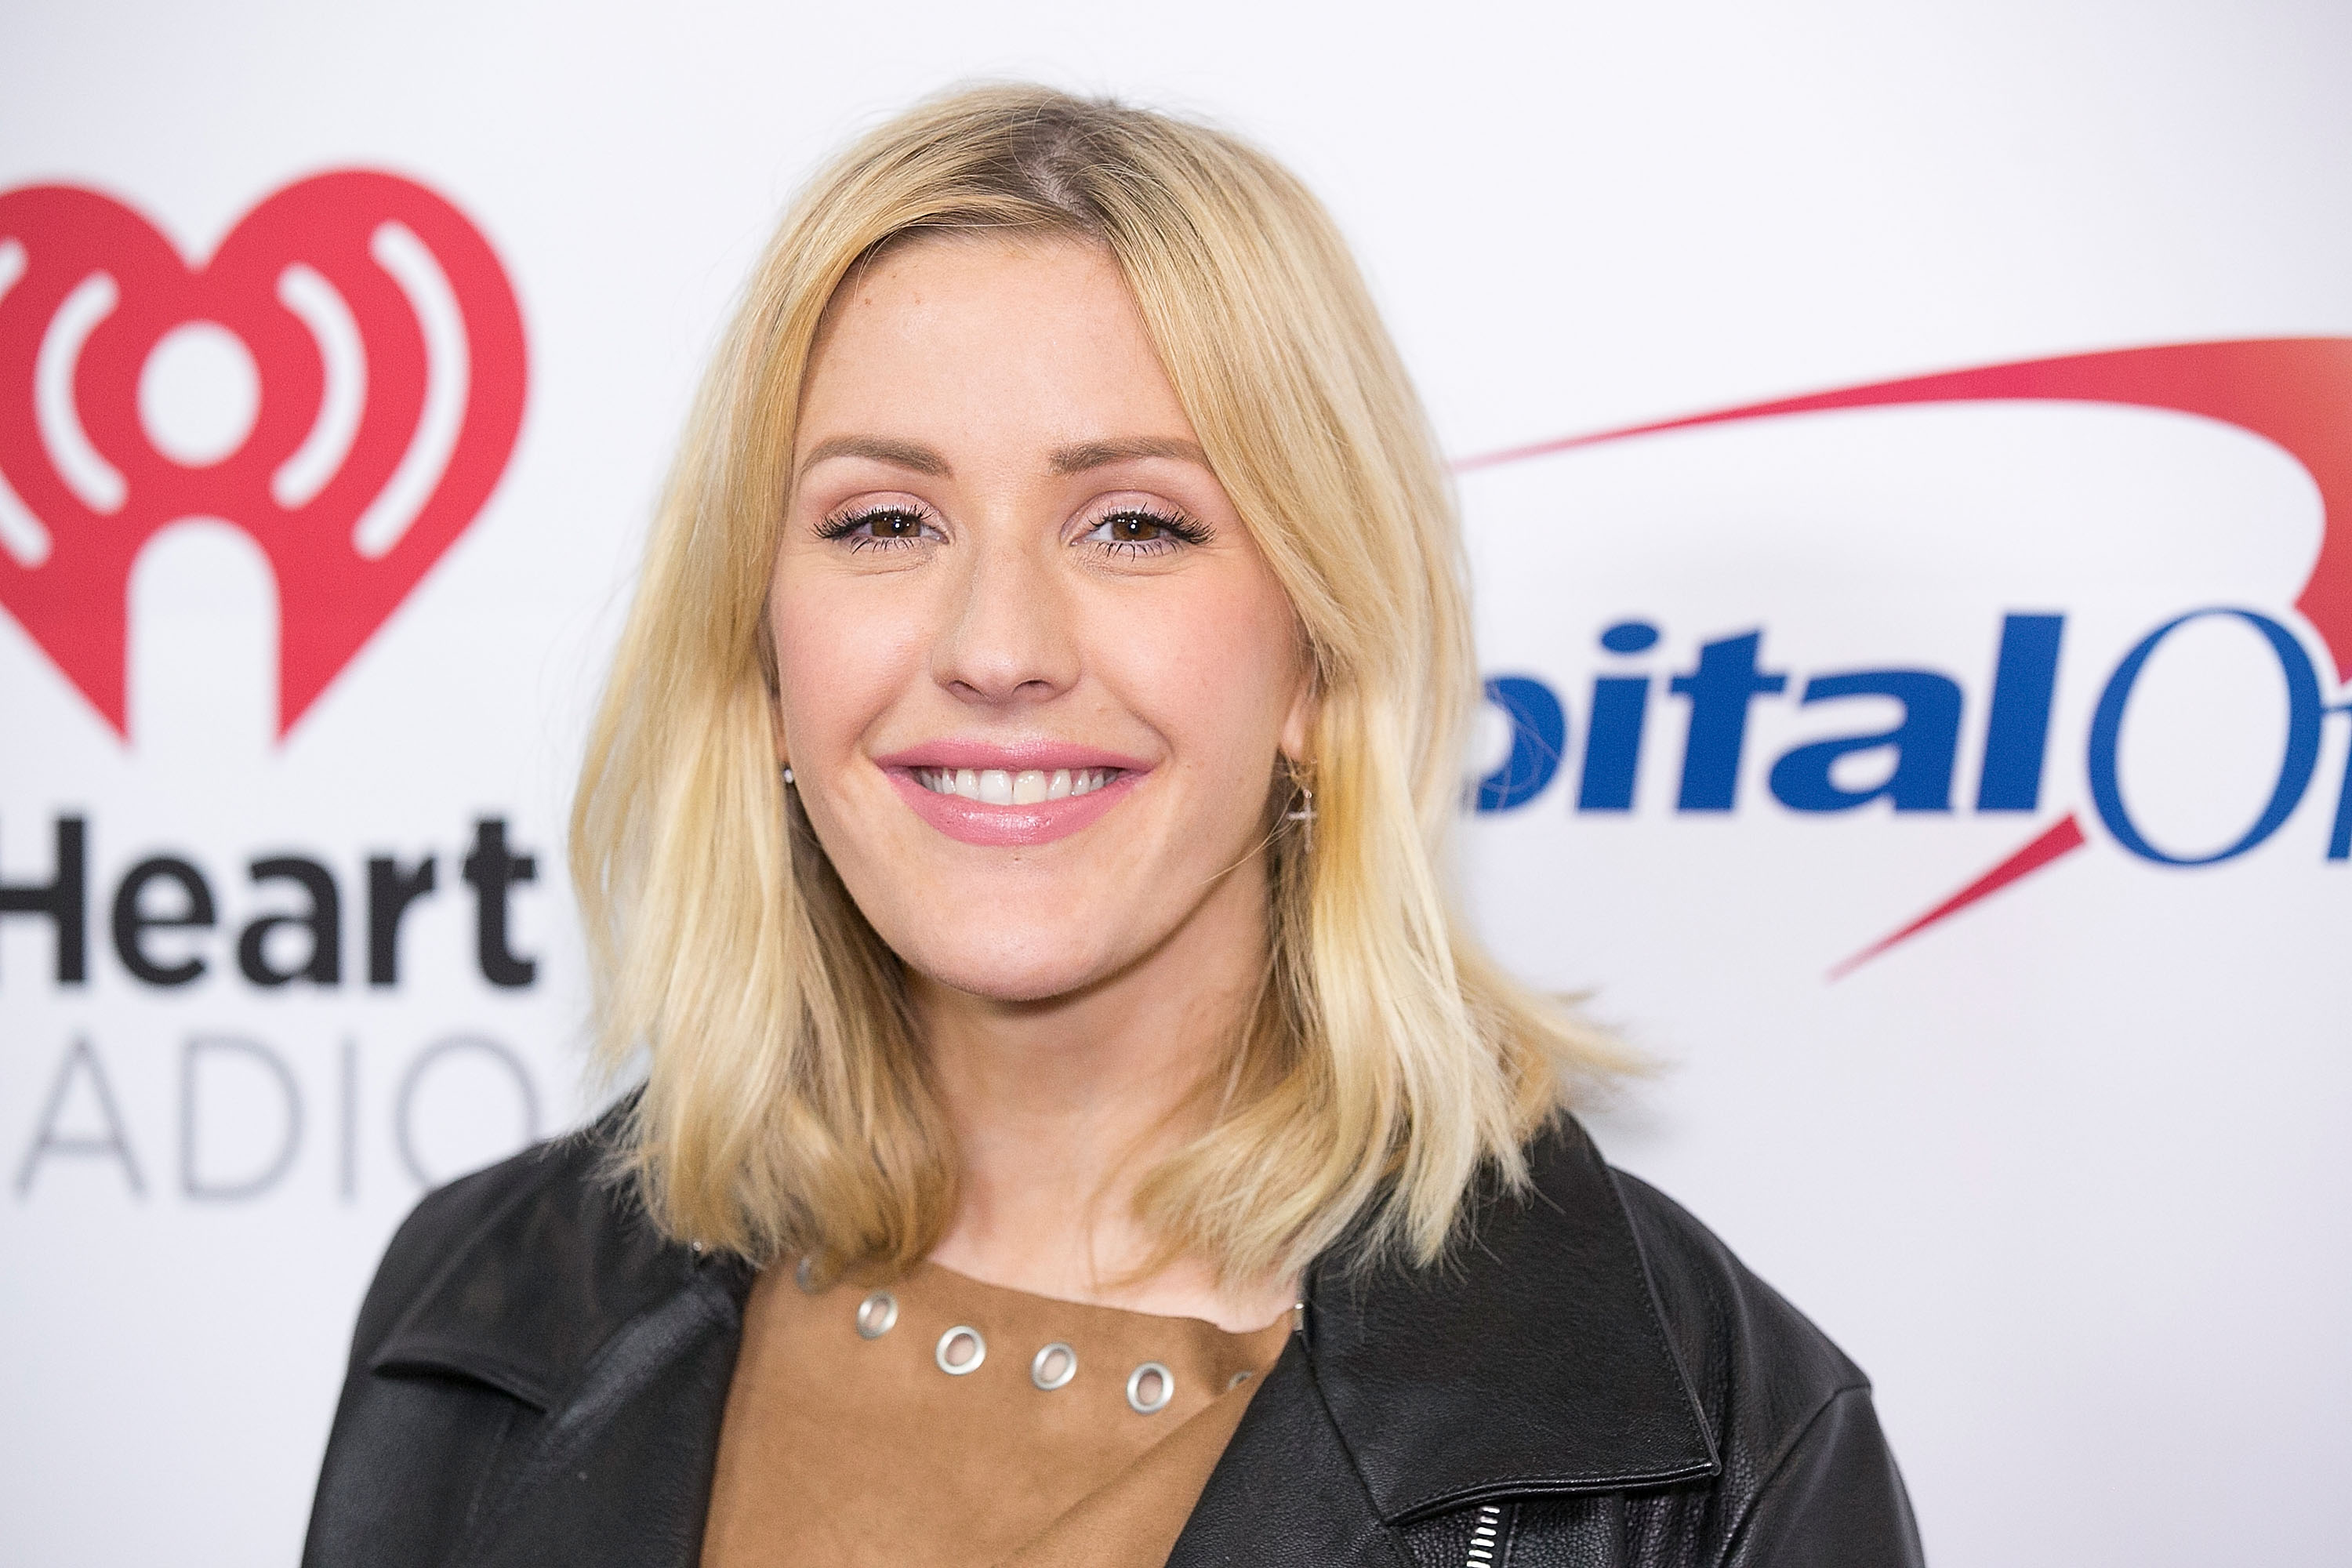 Ellie Goulding Pics, Music Collection